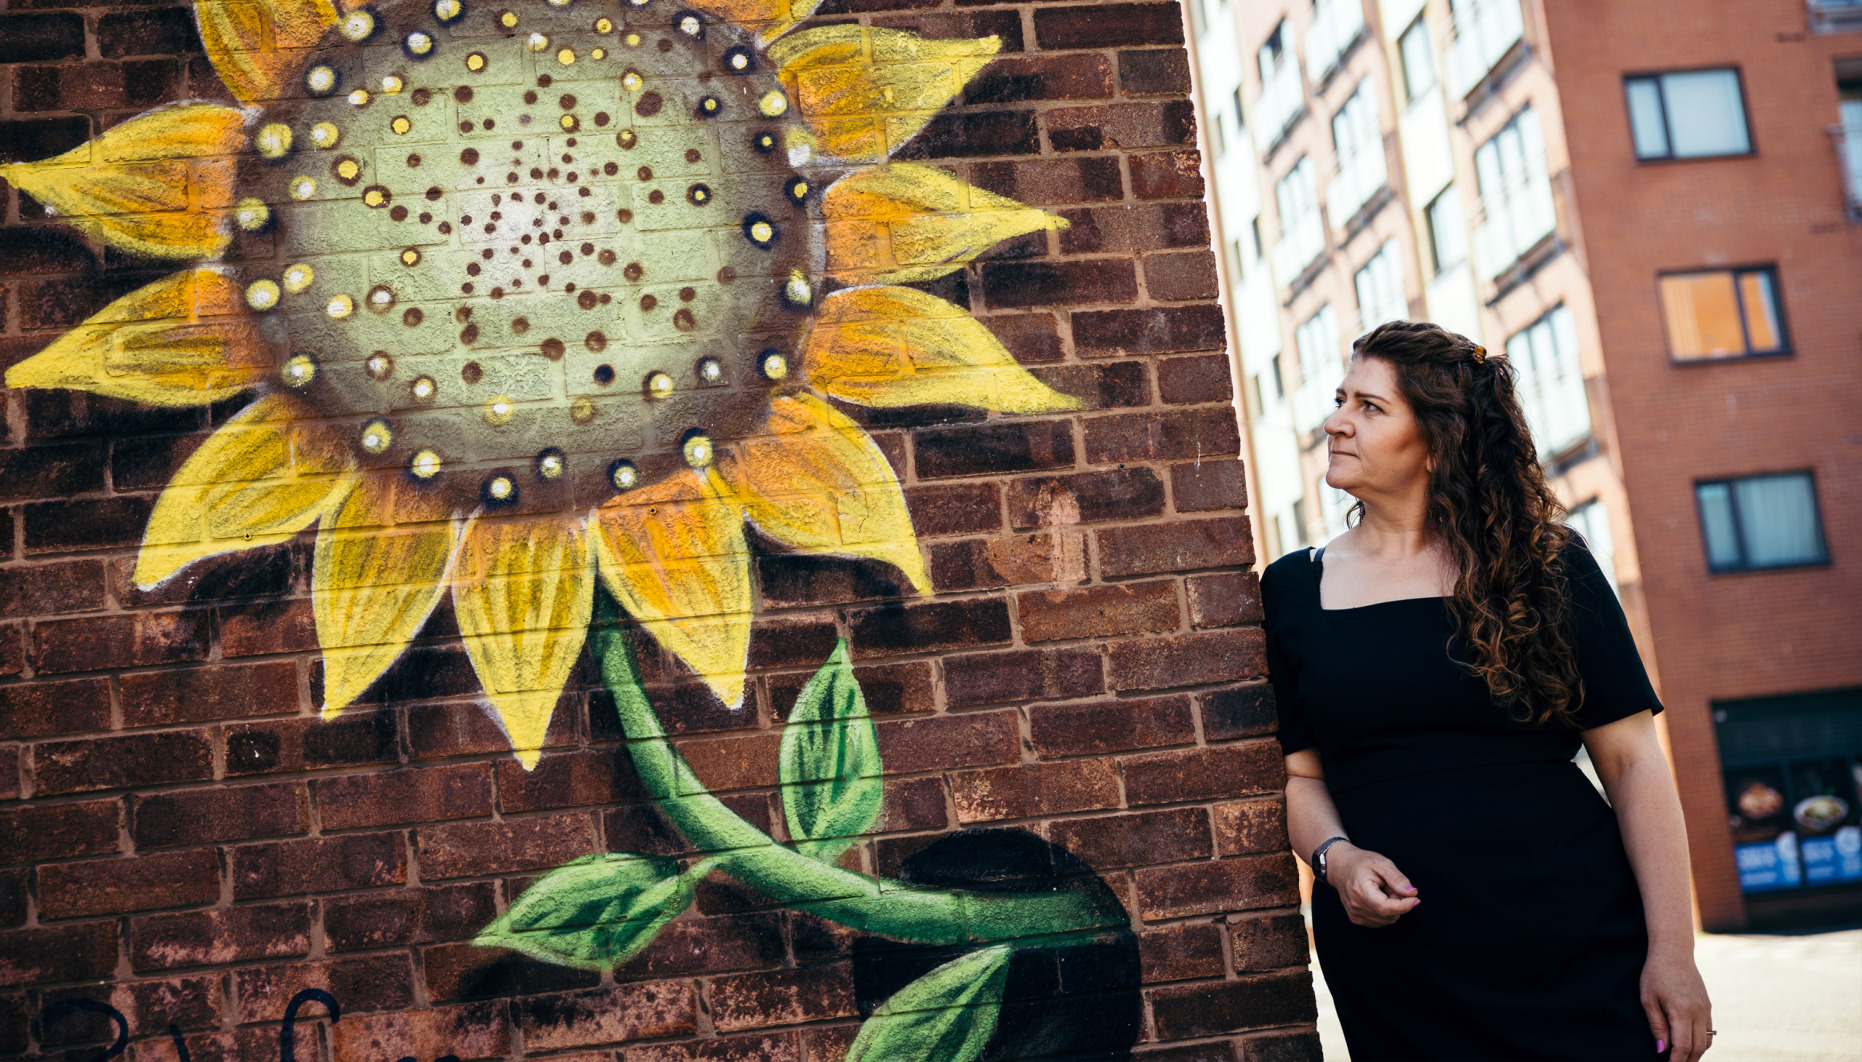 Nanette mellor looking at sunflower wall art in The Fabric District